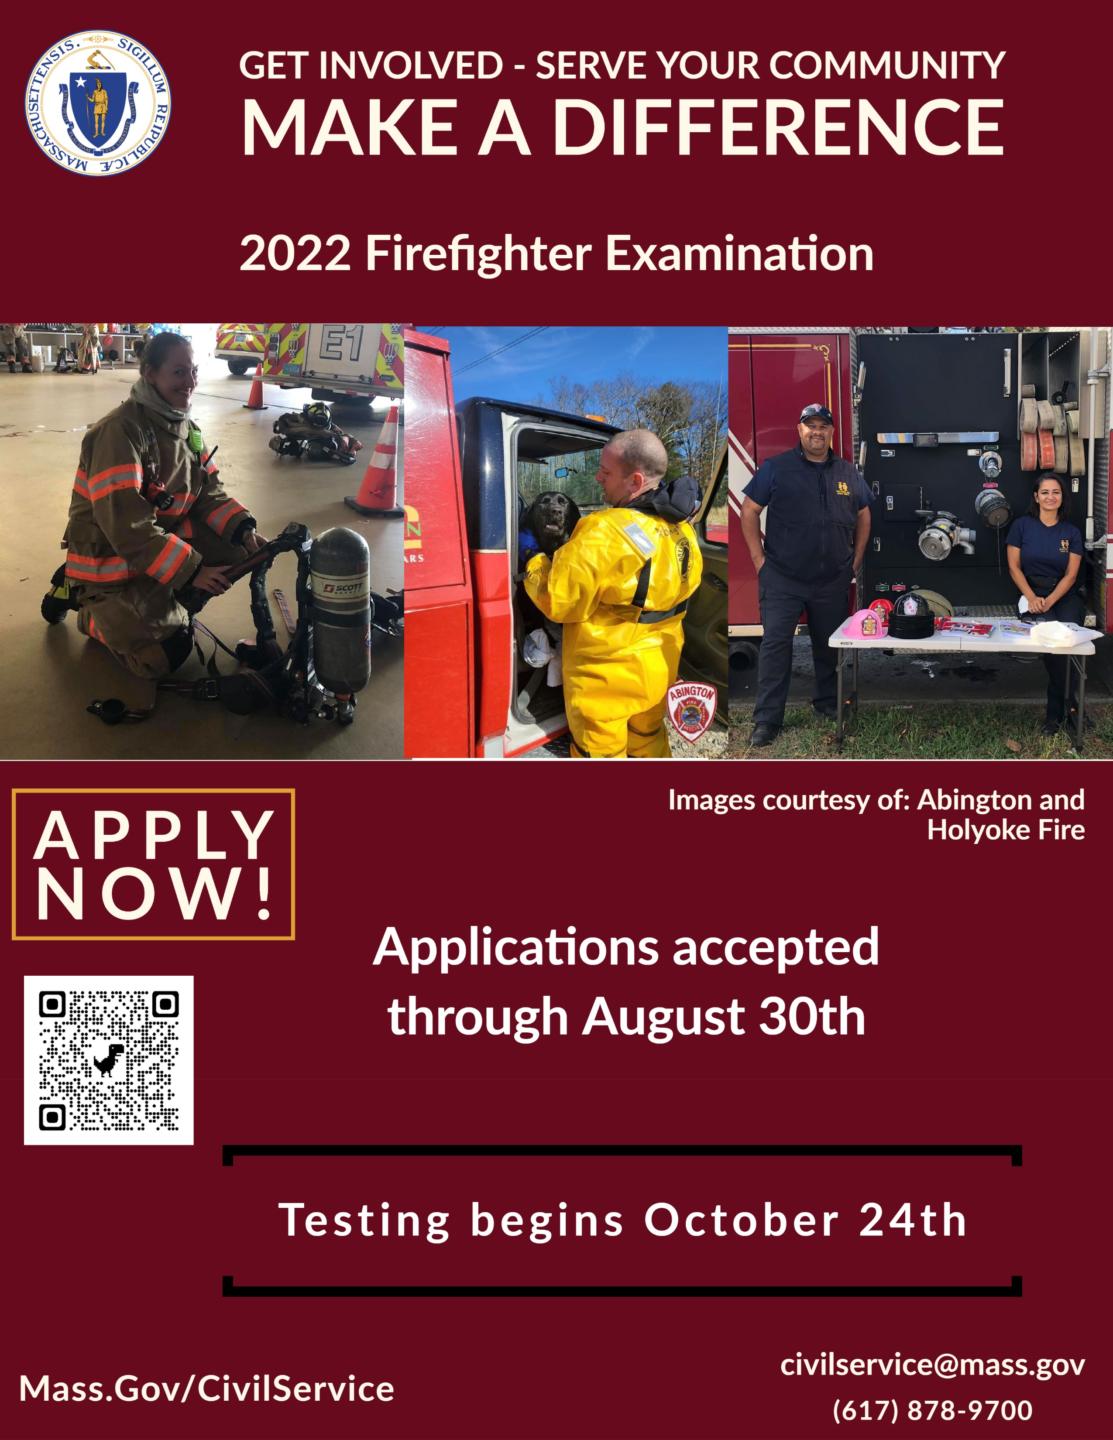 Norwood Fire Department Shares Information on 2022 Municipal